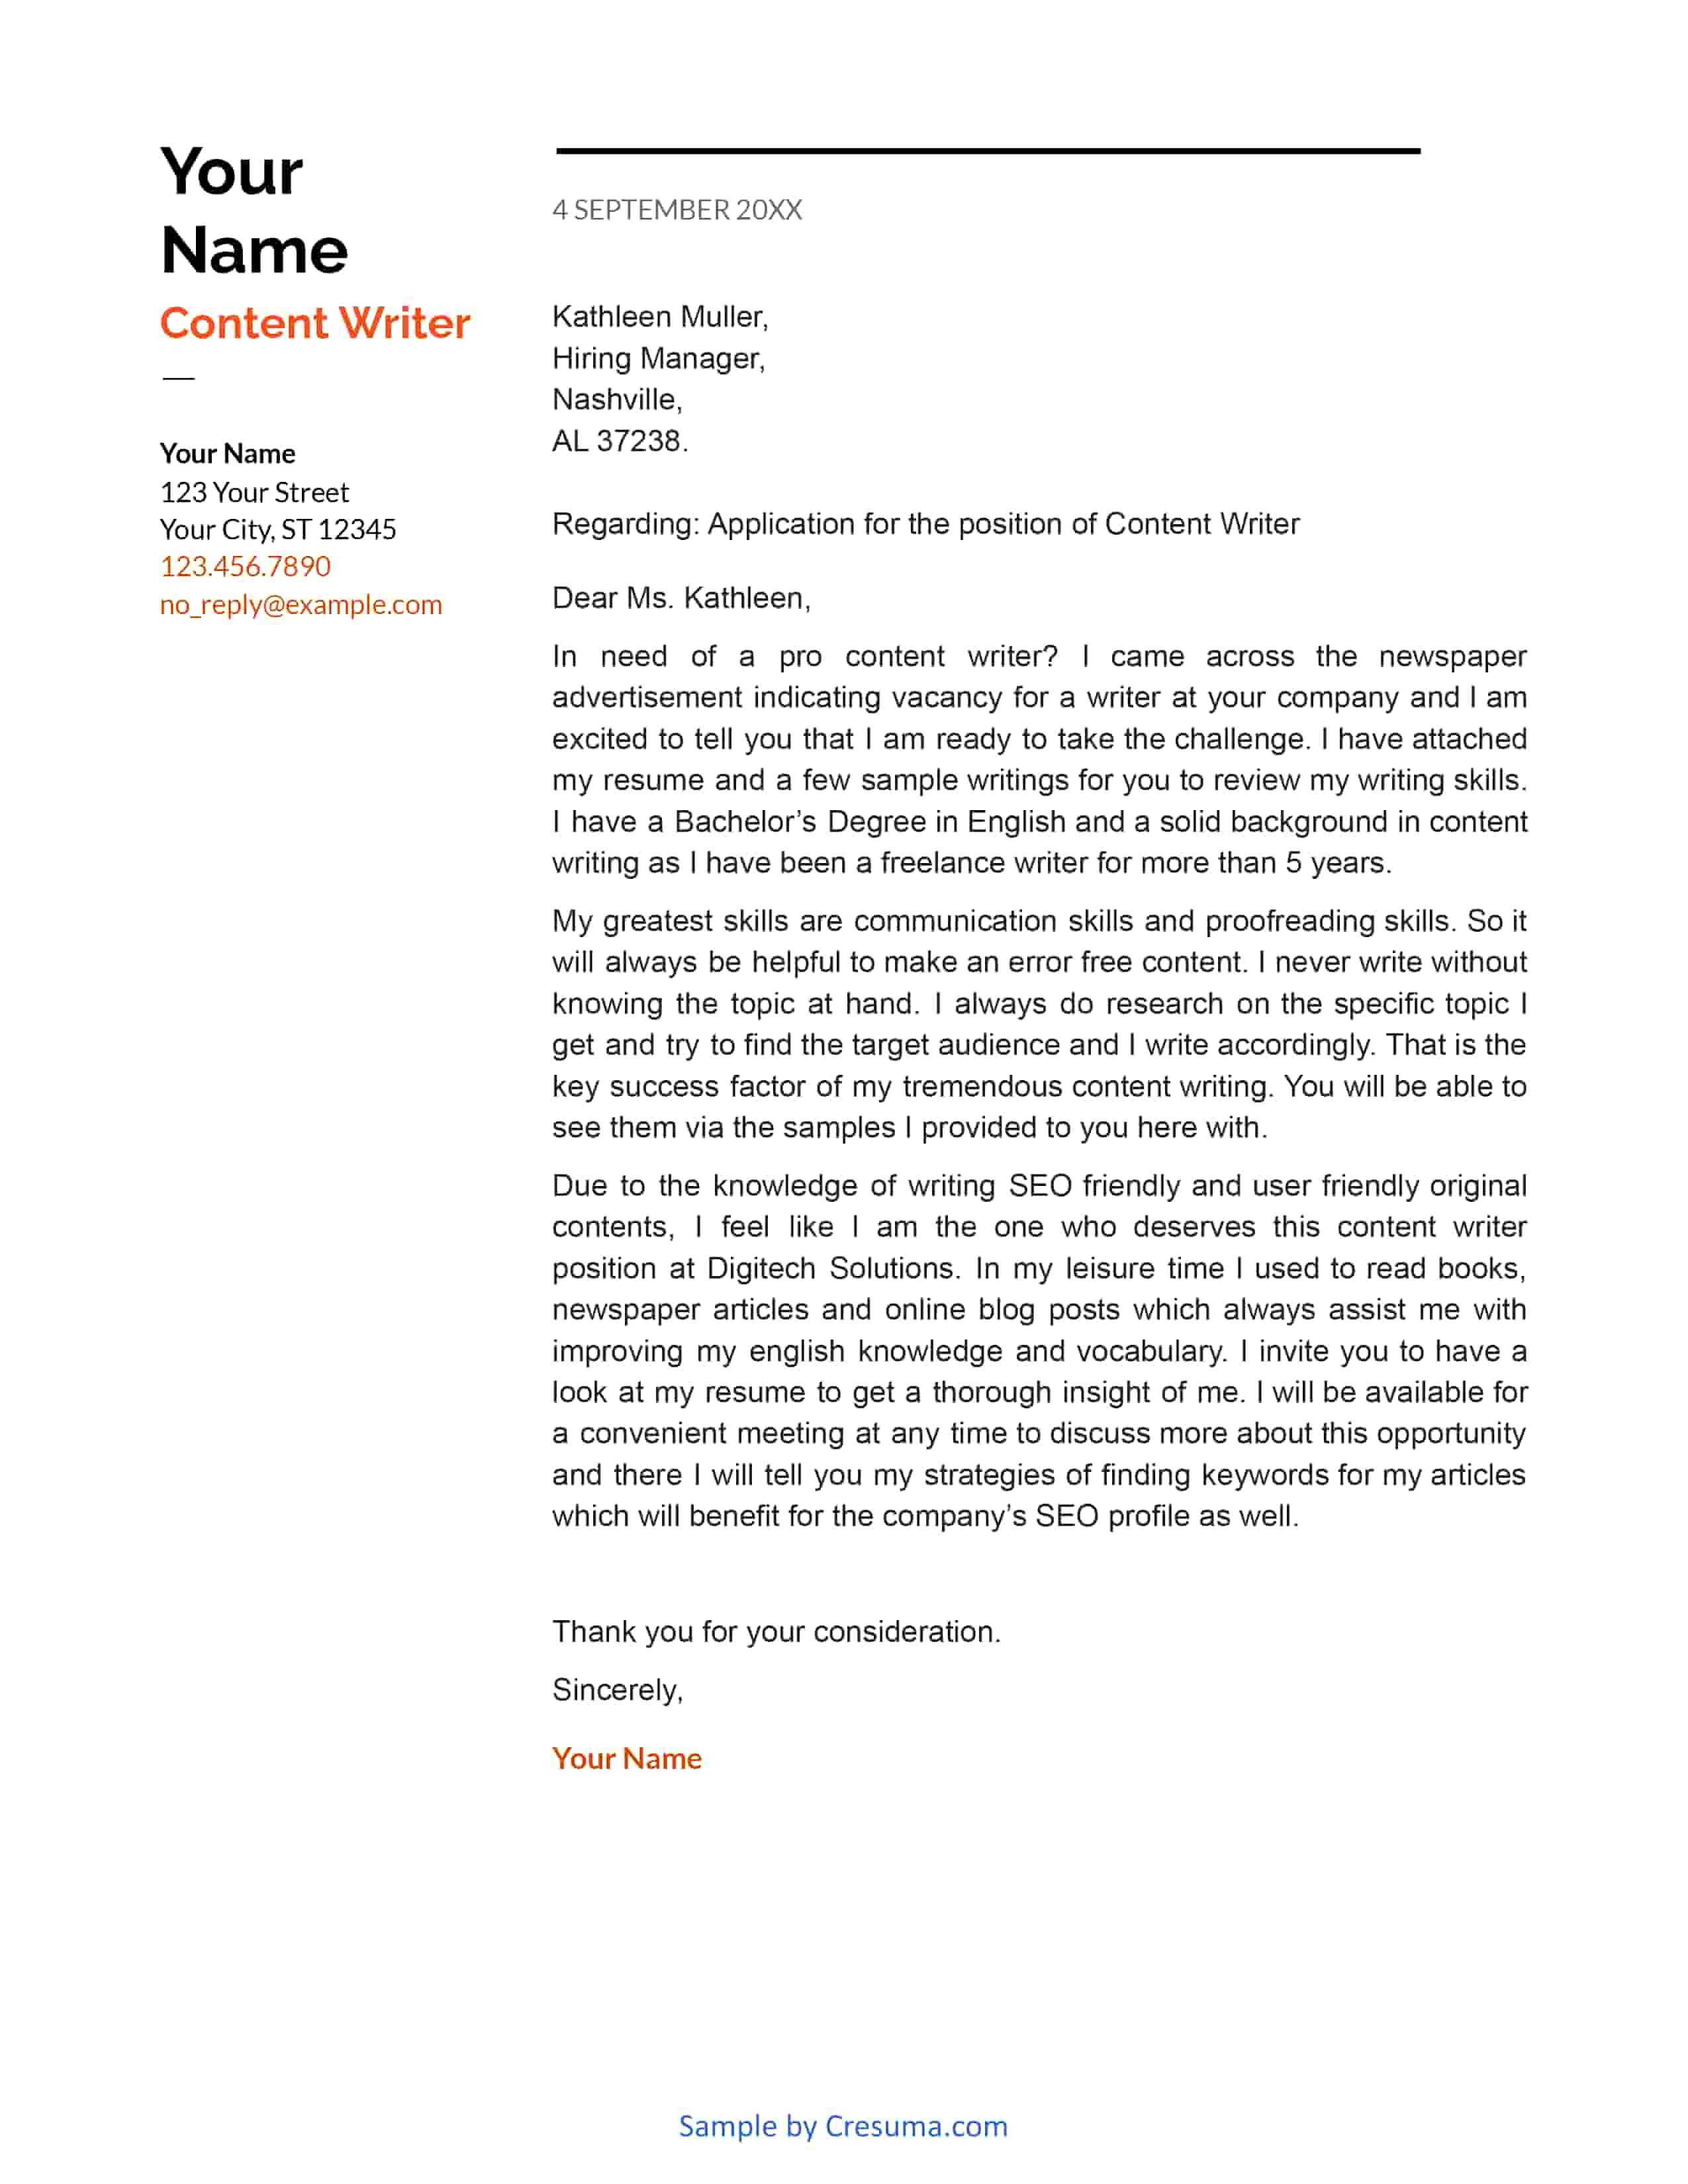 cover letter for content writer fresher